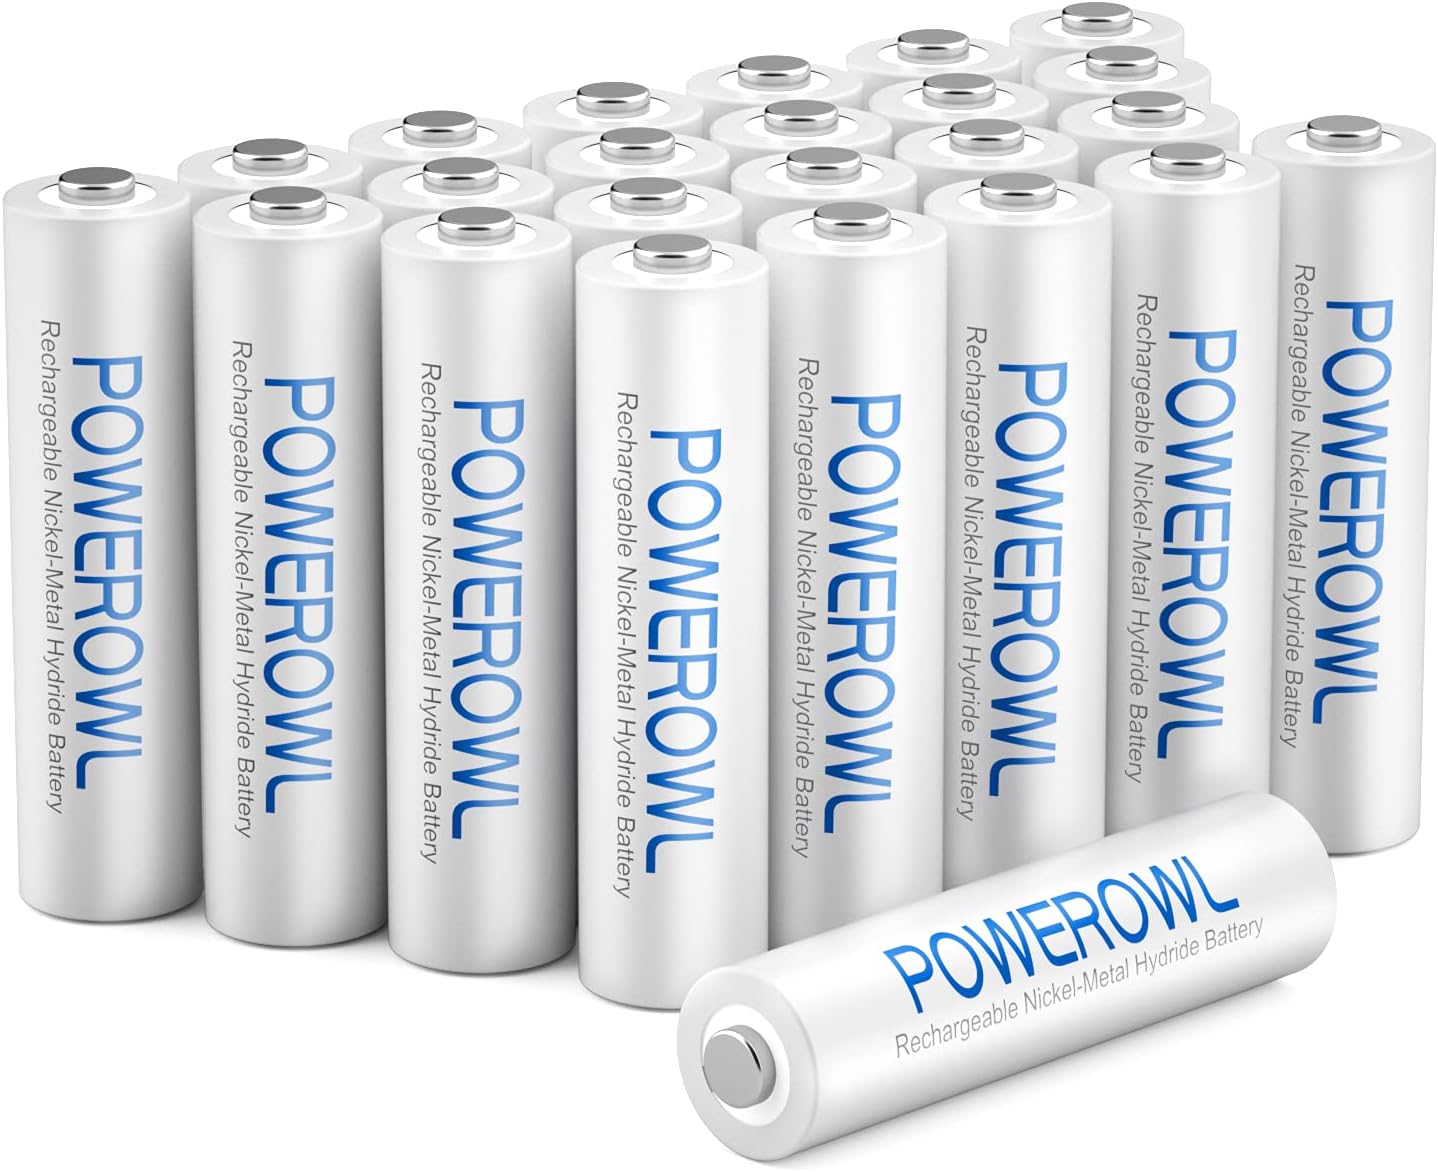 24 pcs POWEROWL AAA rechargeable batteries